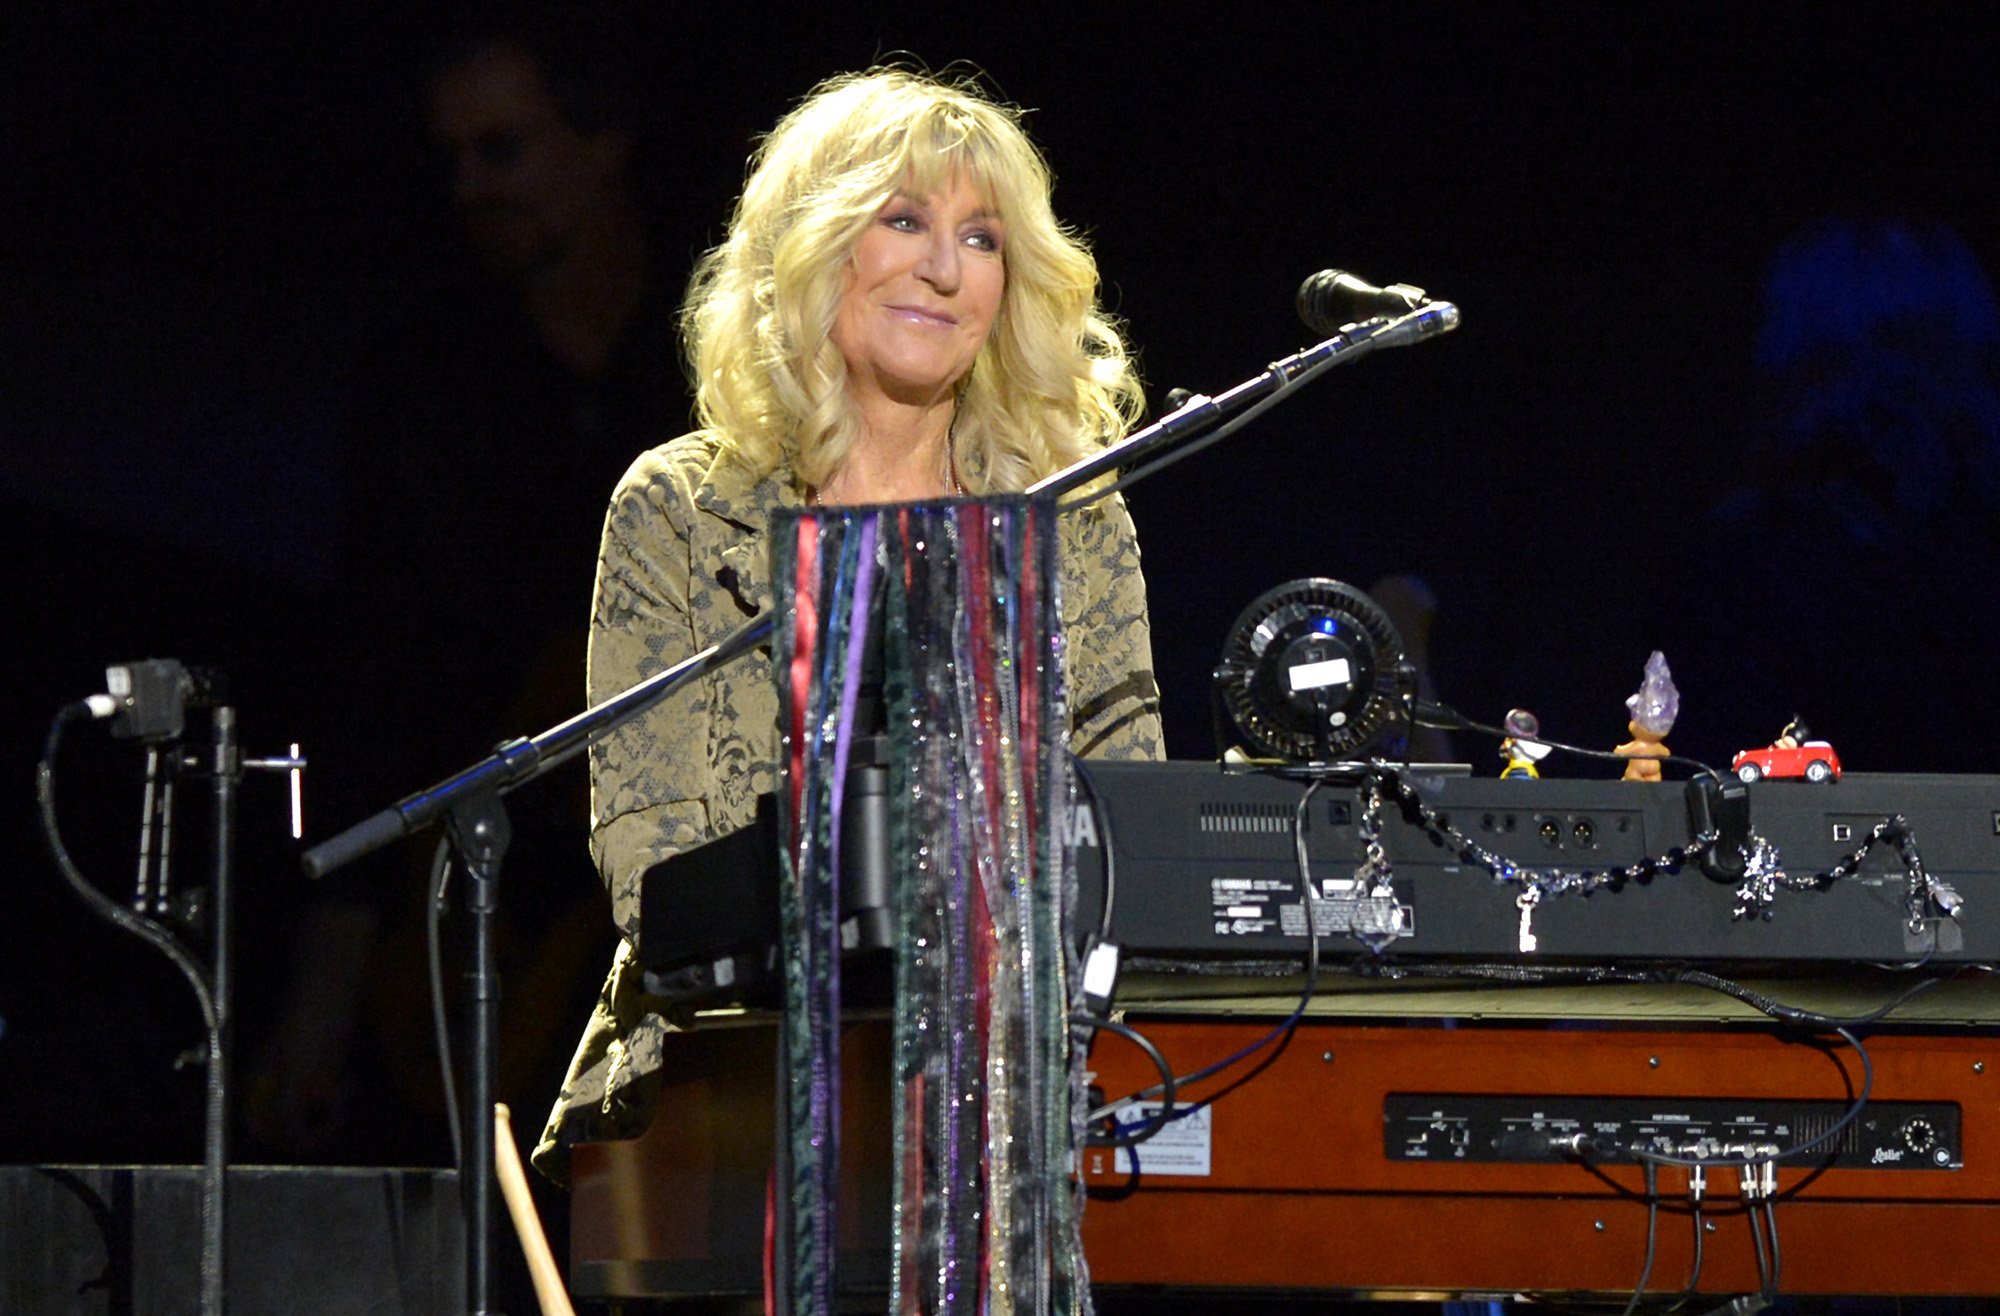 Christine McVie, keyboardist and vocalist for Fleetwood Mac, performs at the Spectrum Center in Charlotte, North Carolina, on Feb. 24, 2019 | Source: Getty Images 